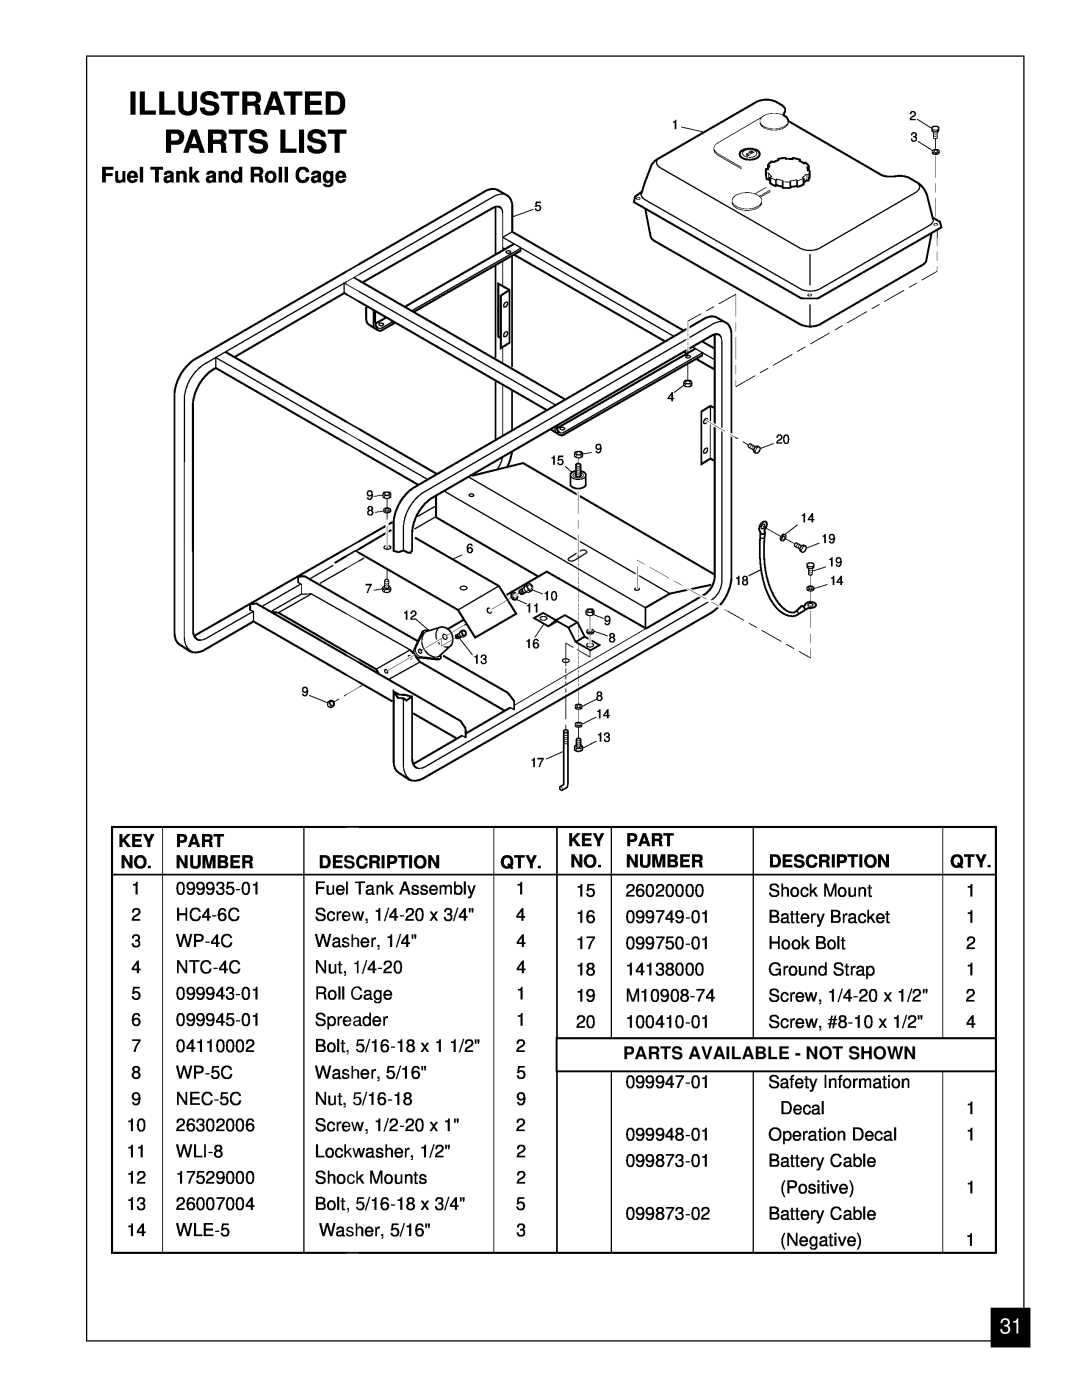 Master Lock MGY5000 installation manual Illustrated, Fuel Tank and Roll Cage, Parts List 